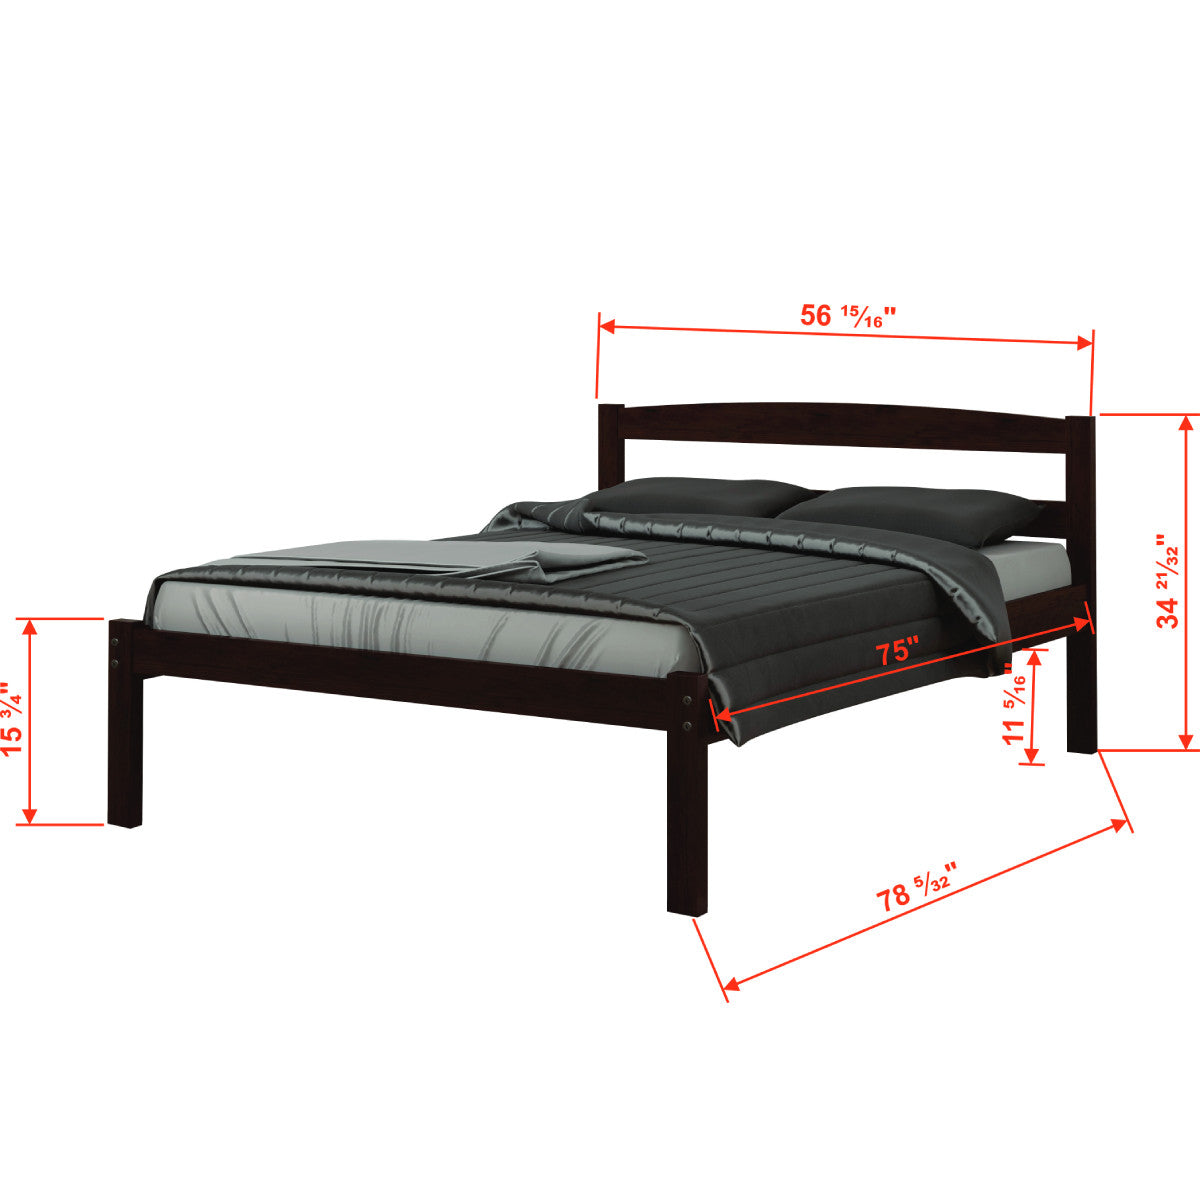 FULL ECONO BED WITH DUAL UNDER BED DRAWERS DARK CAPPUCCINO FINISH